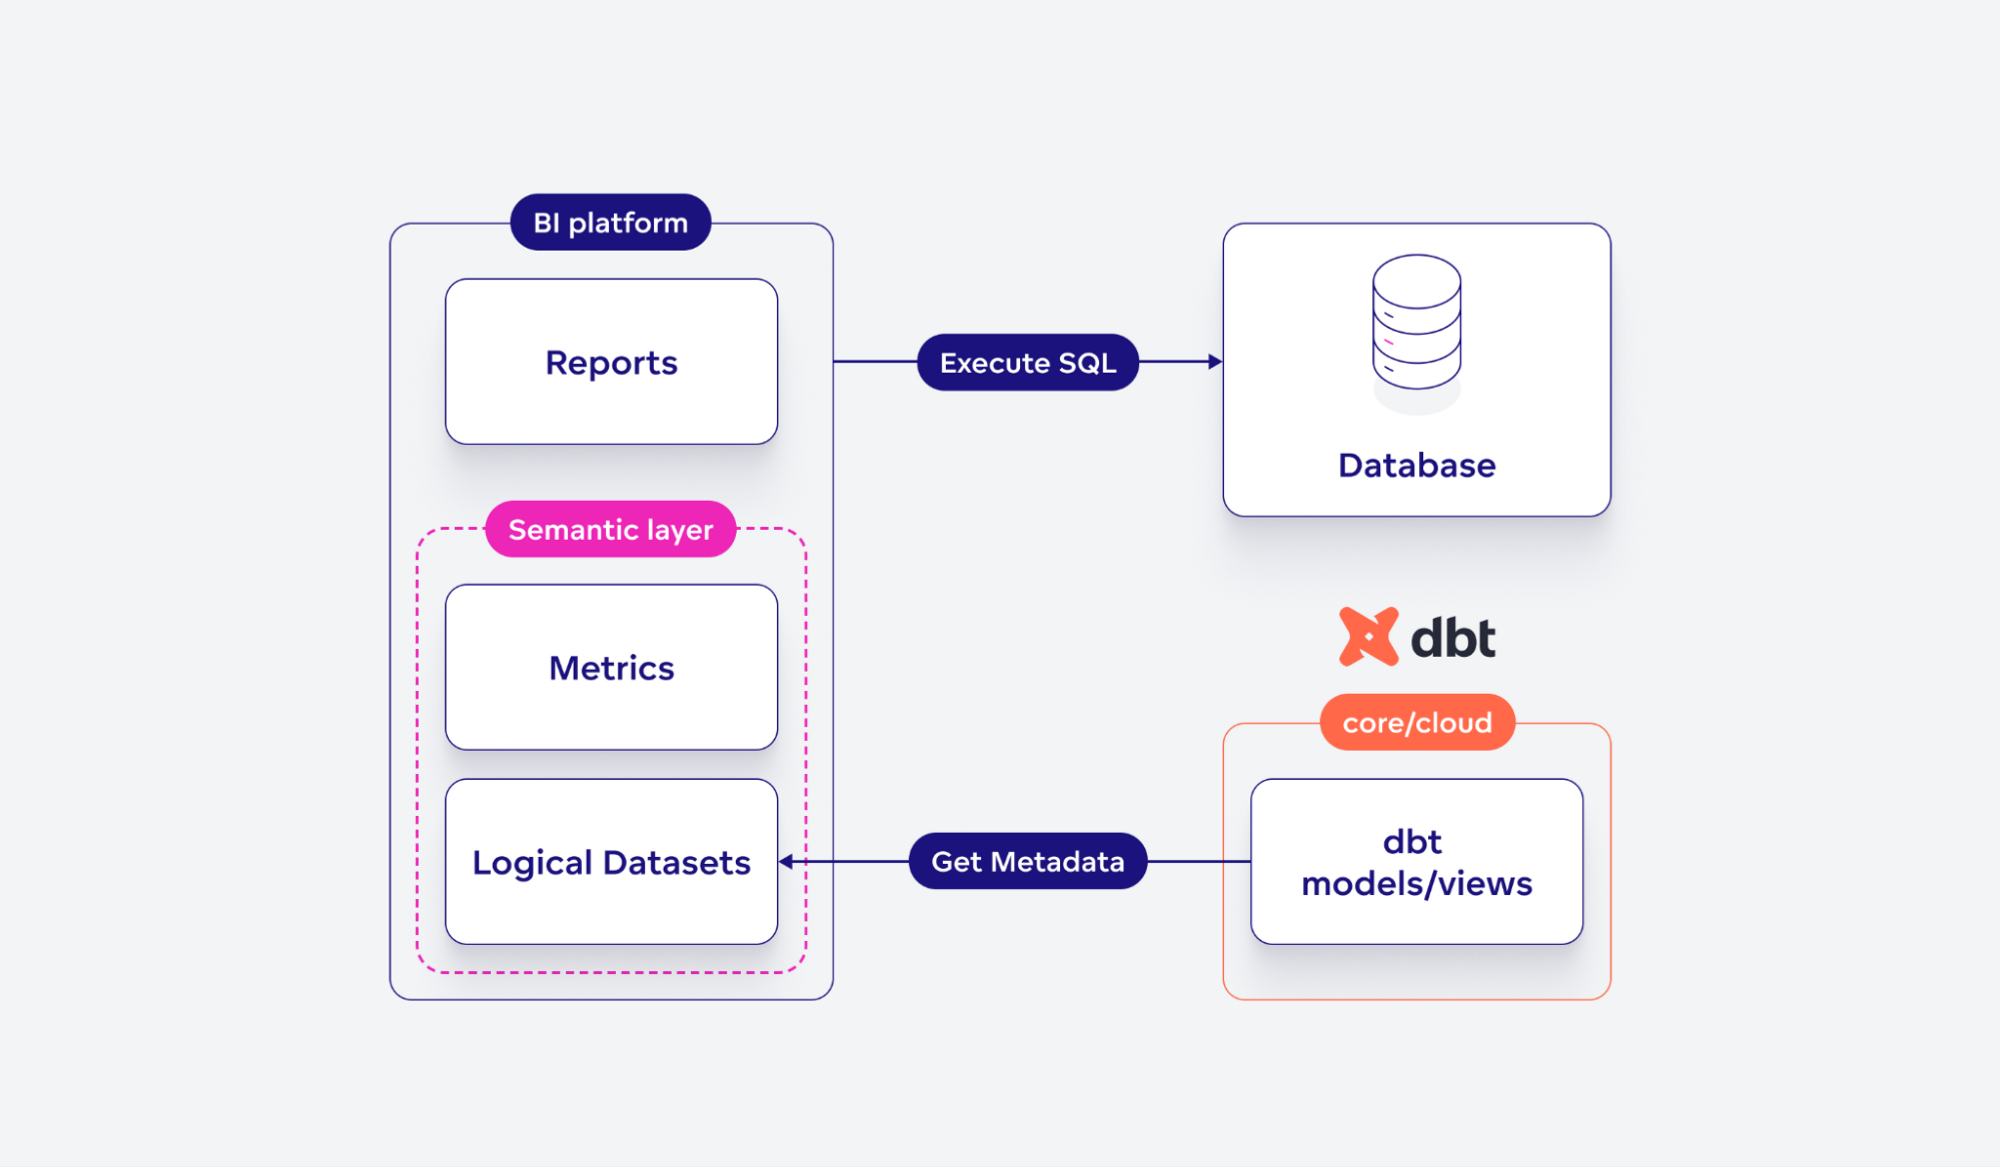 BI platform contains a semantic layer. It can generate SQL from metrics and a logical data model(datasets). It can execute SQL and cache results.